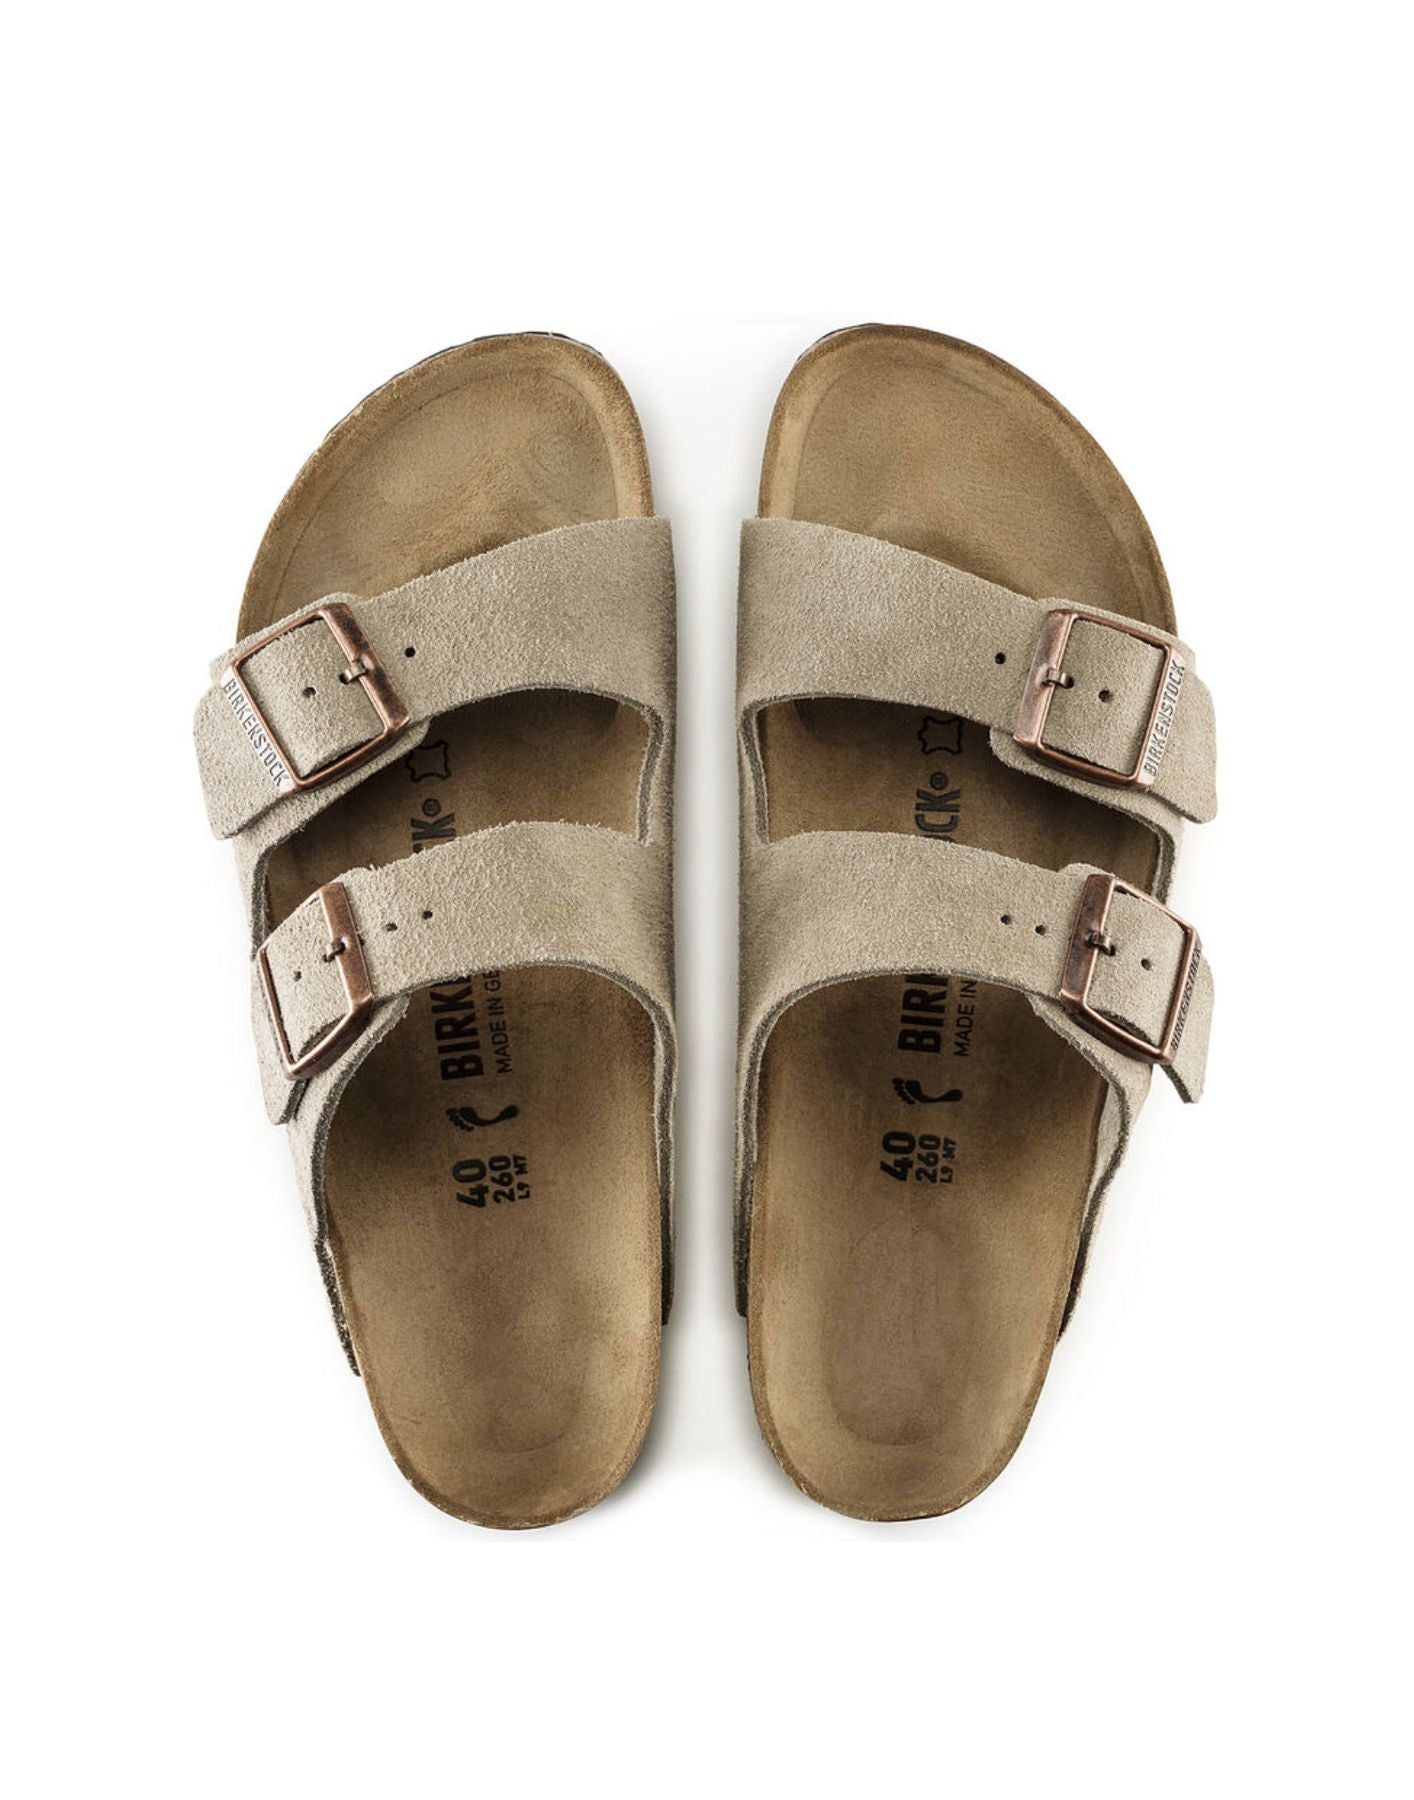 Chasseurs pour homme 0051463 M Taupe Birkenstock